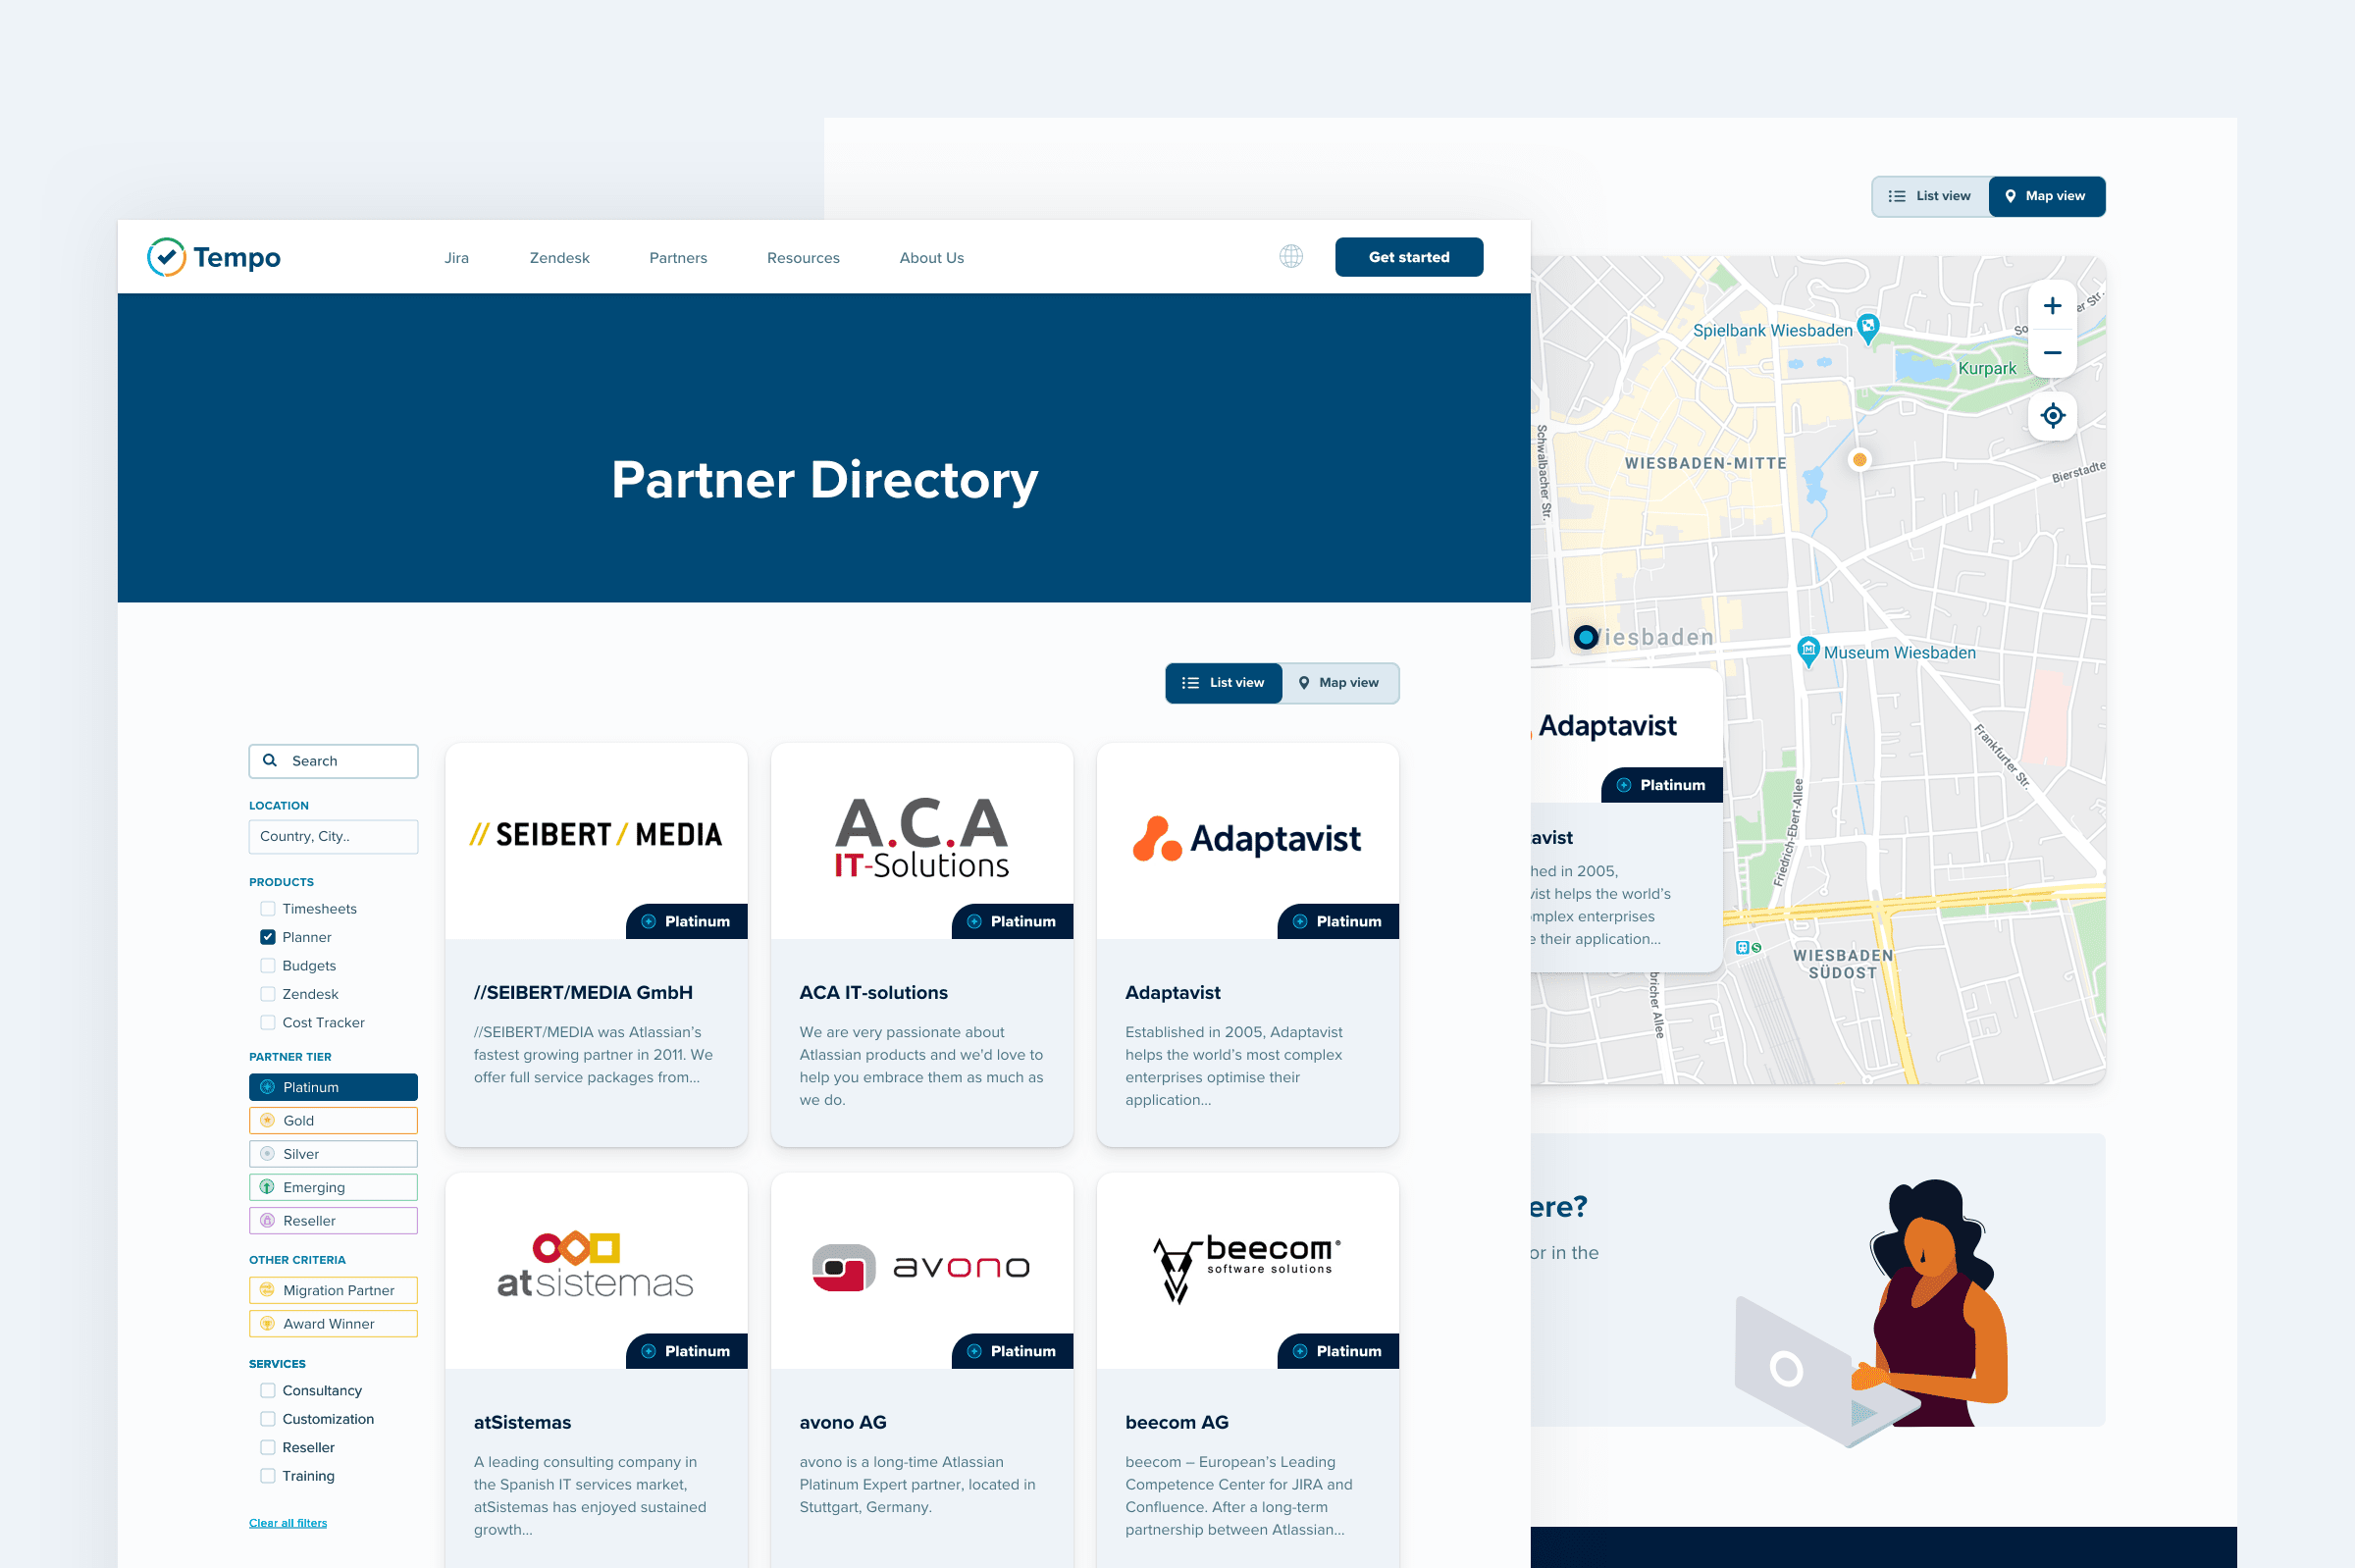 Tempo partners directory